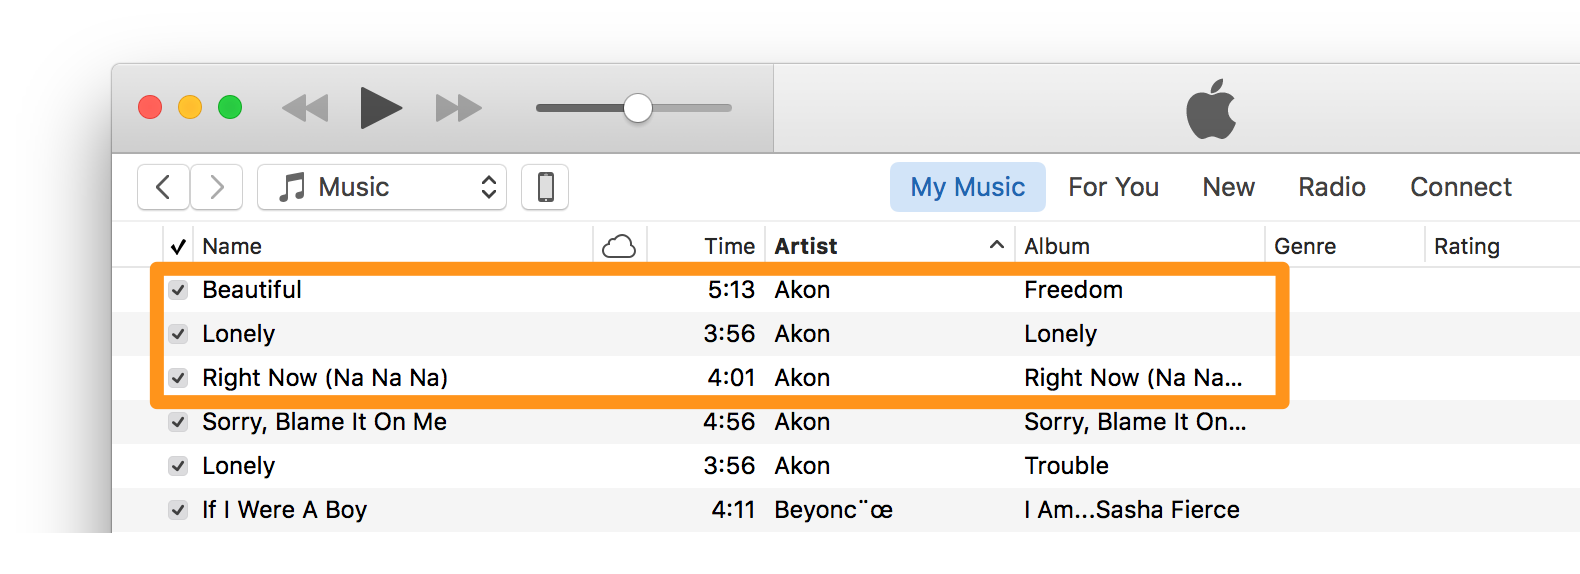 How to Put Music on iPhone with iTunes – Step 3